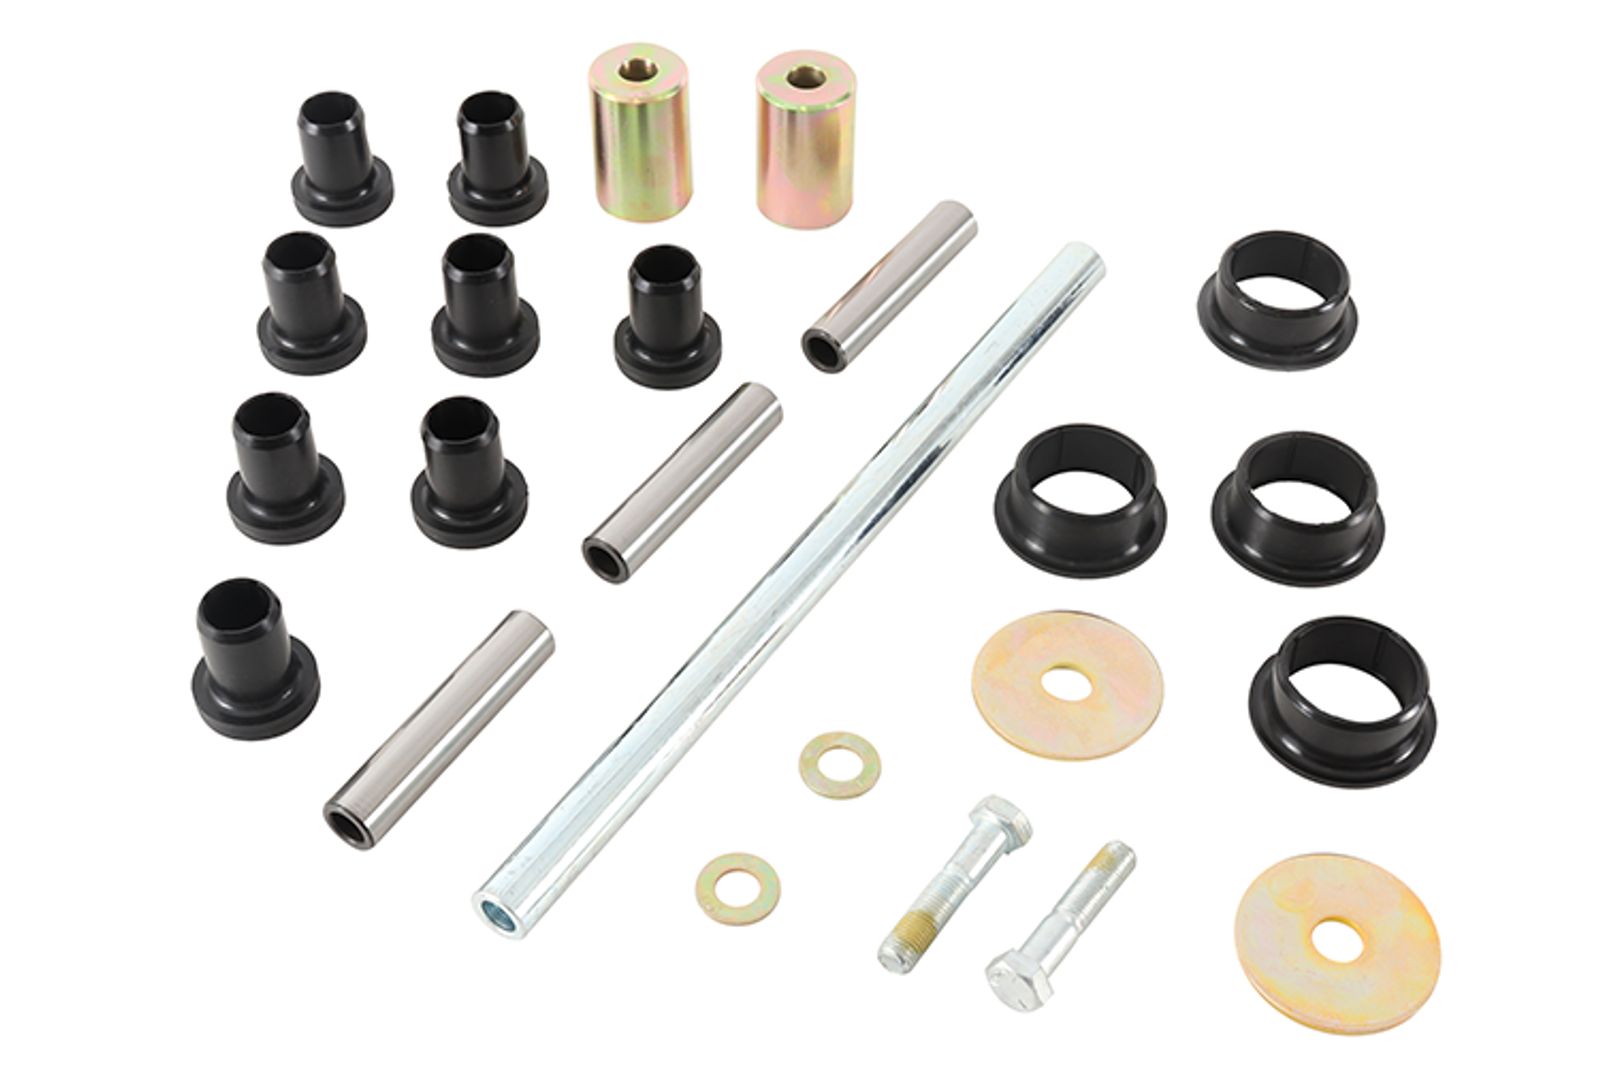 Wrp Rear Ind. Suspension Kits - WRP501166 image